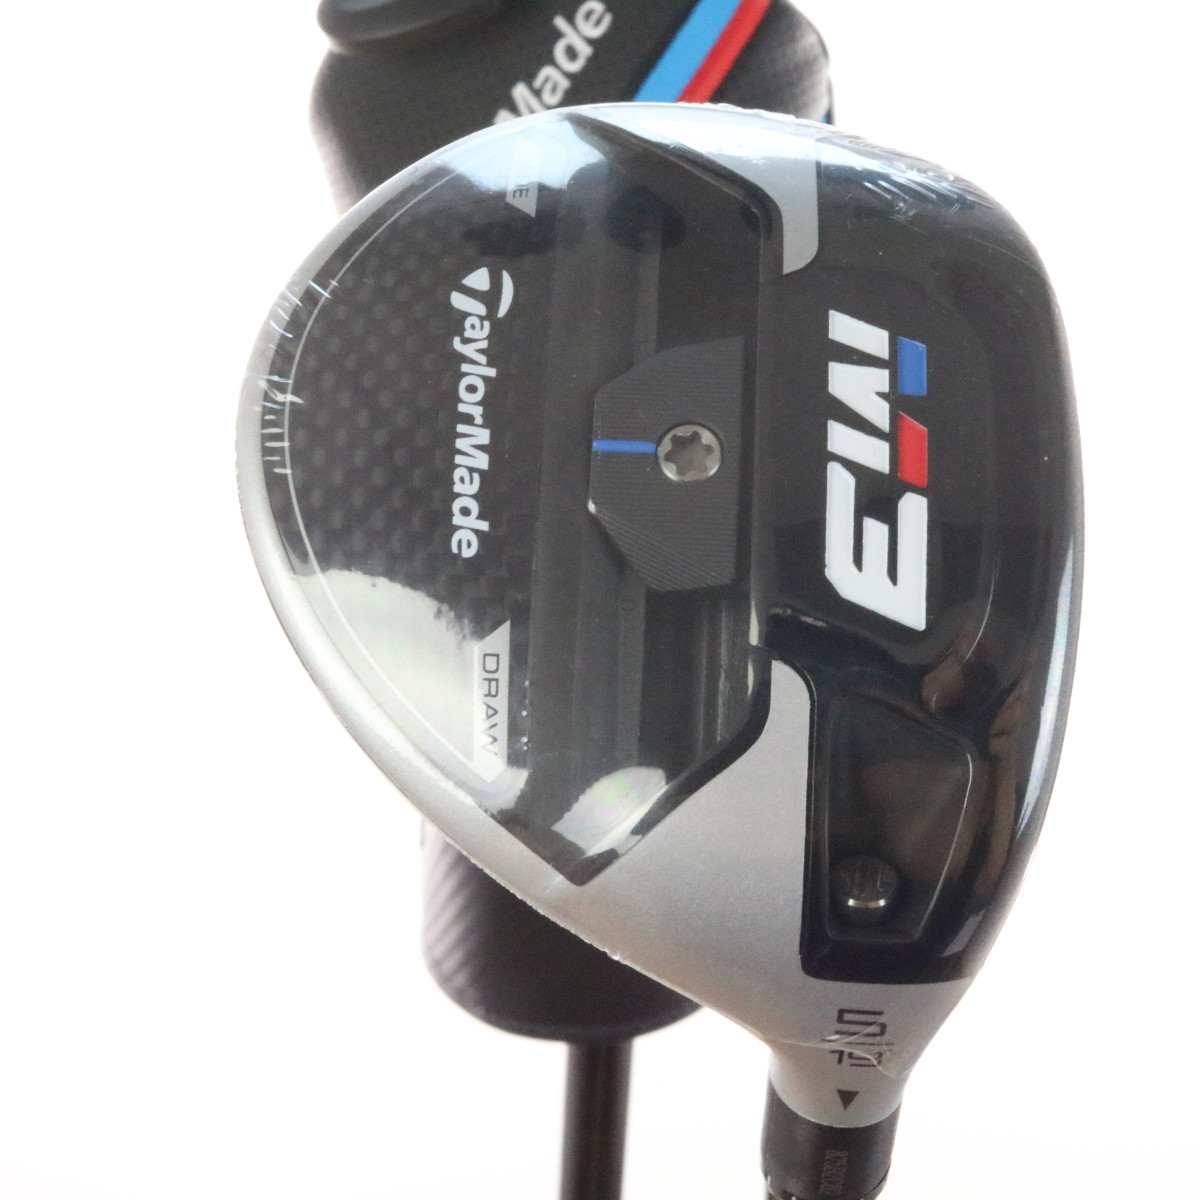 TaylorMade M3 5-wood